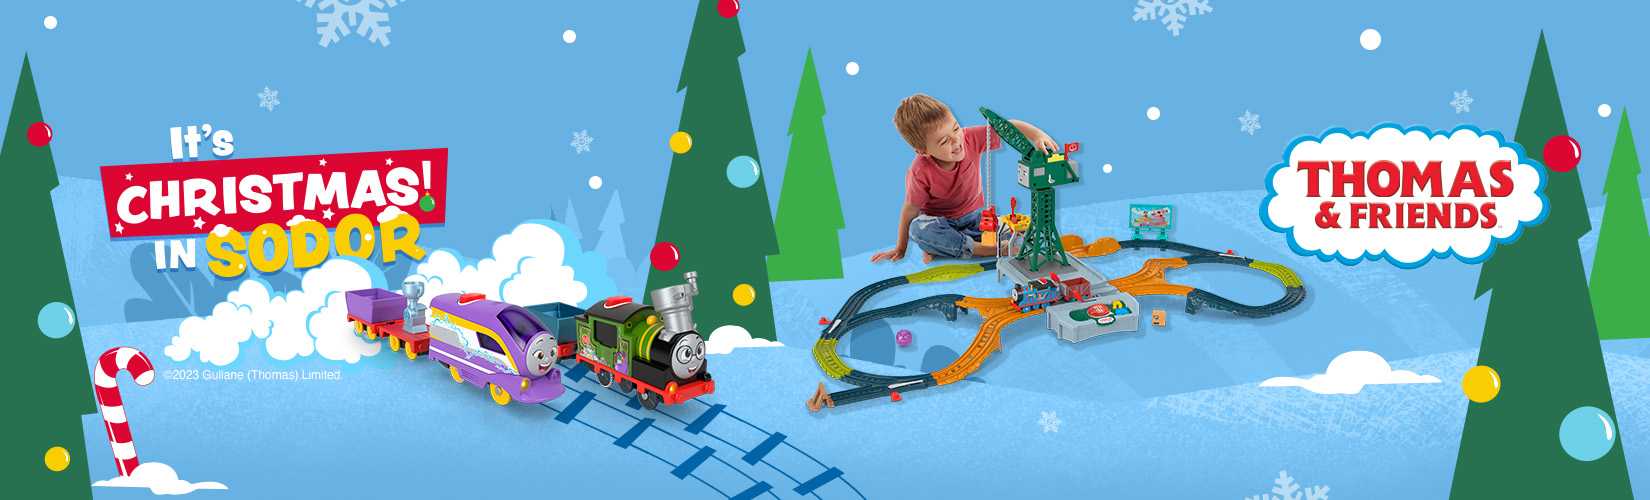 It's Christmas in Sodor. Thomas & Friends.